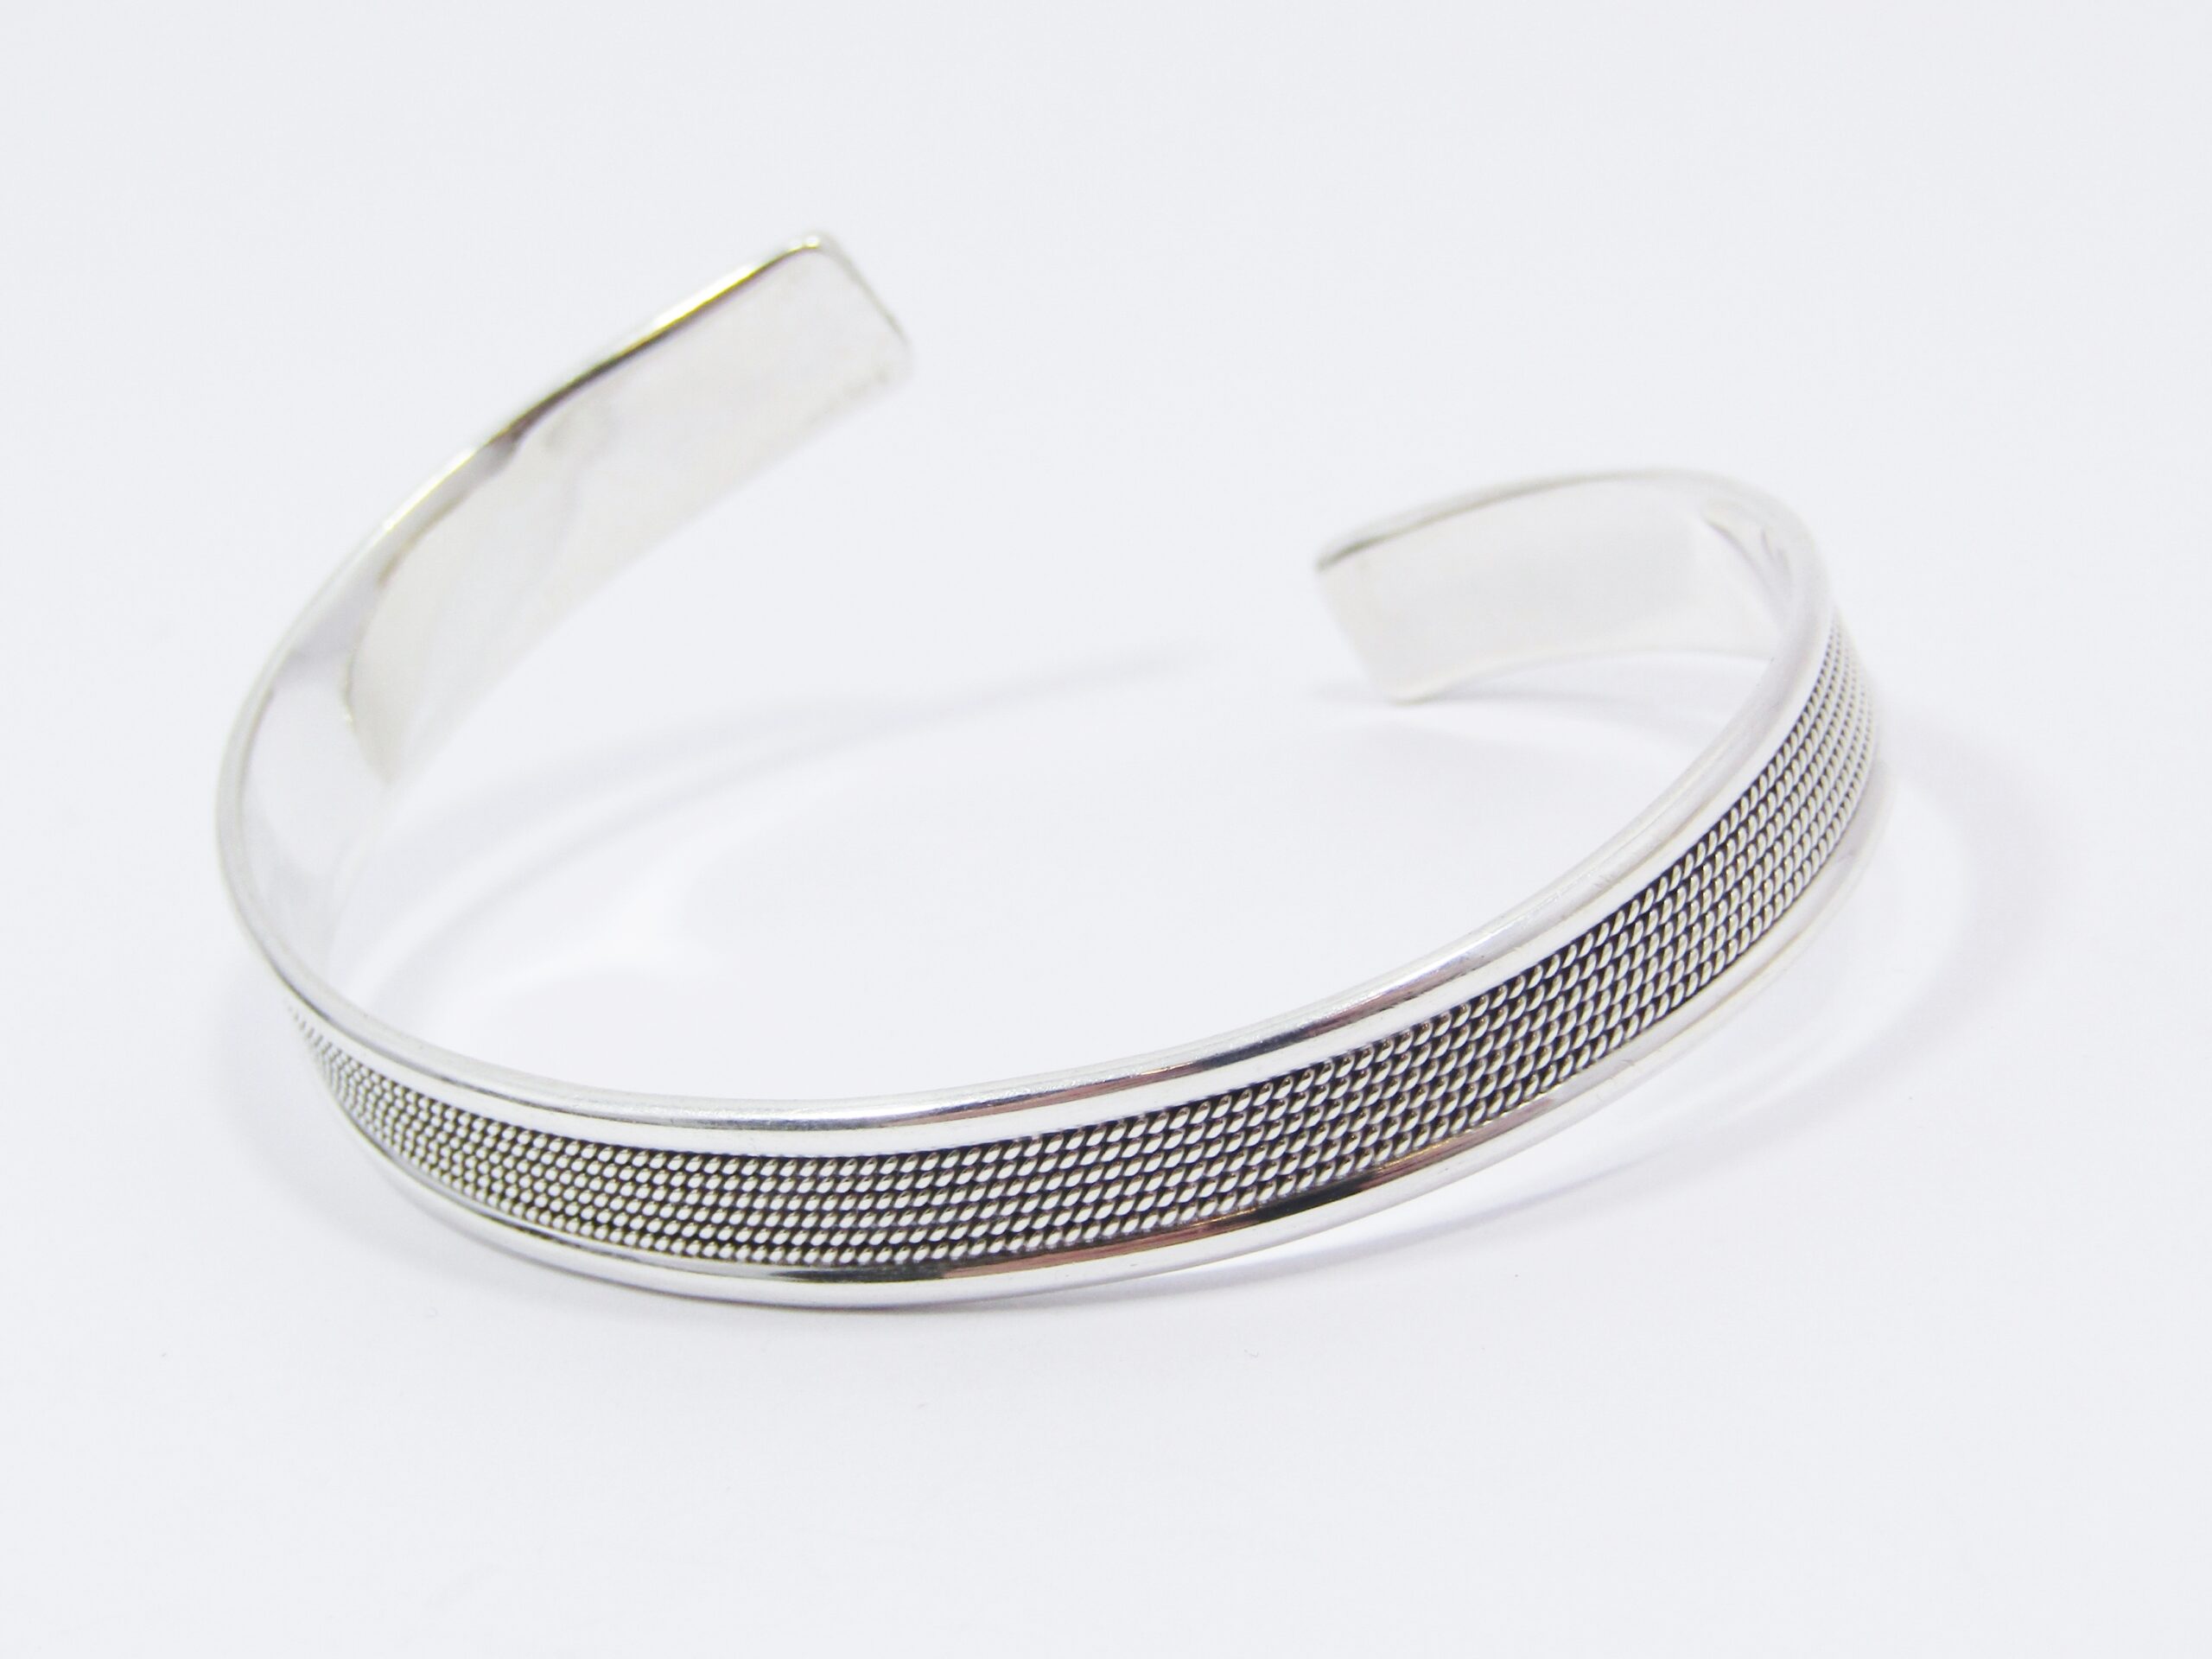 A Lovely Mesh Design Cuff Bangle in Sterling Silver.